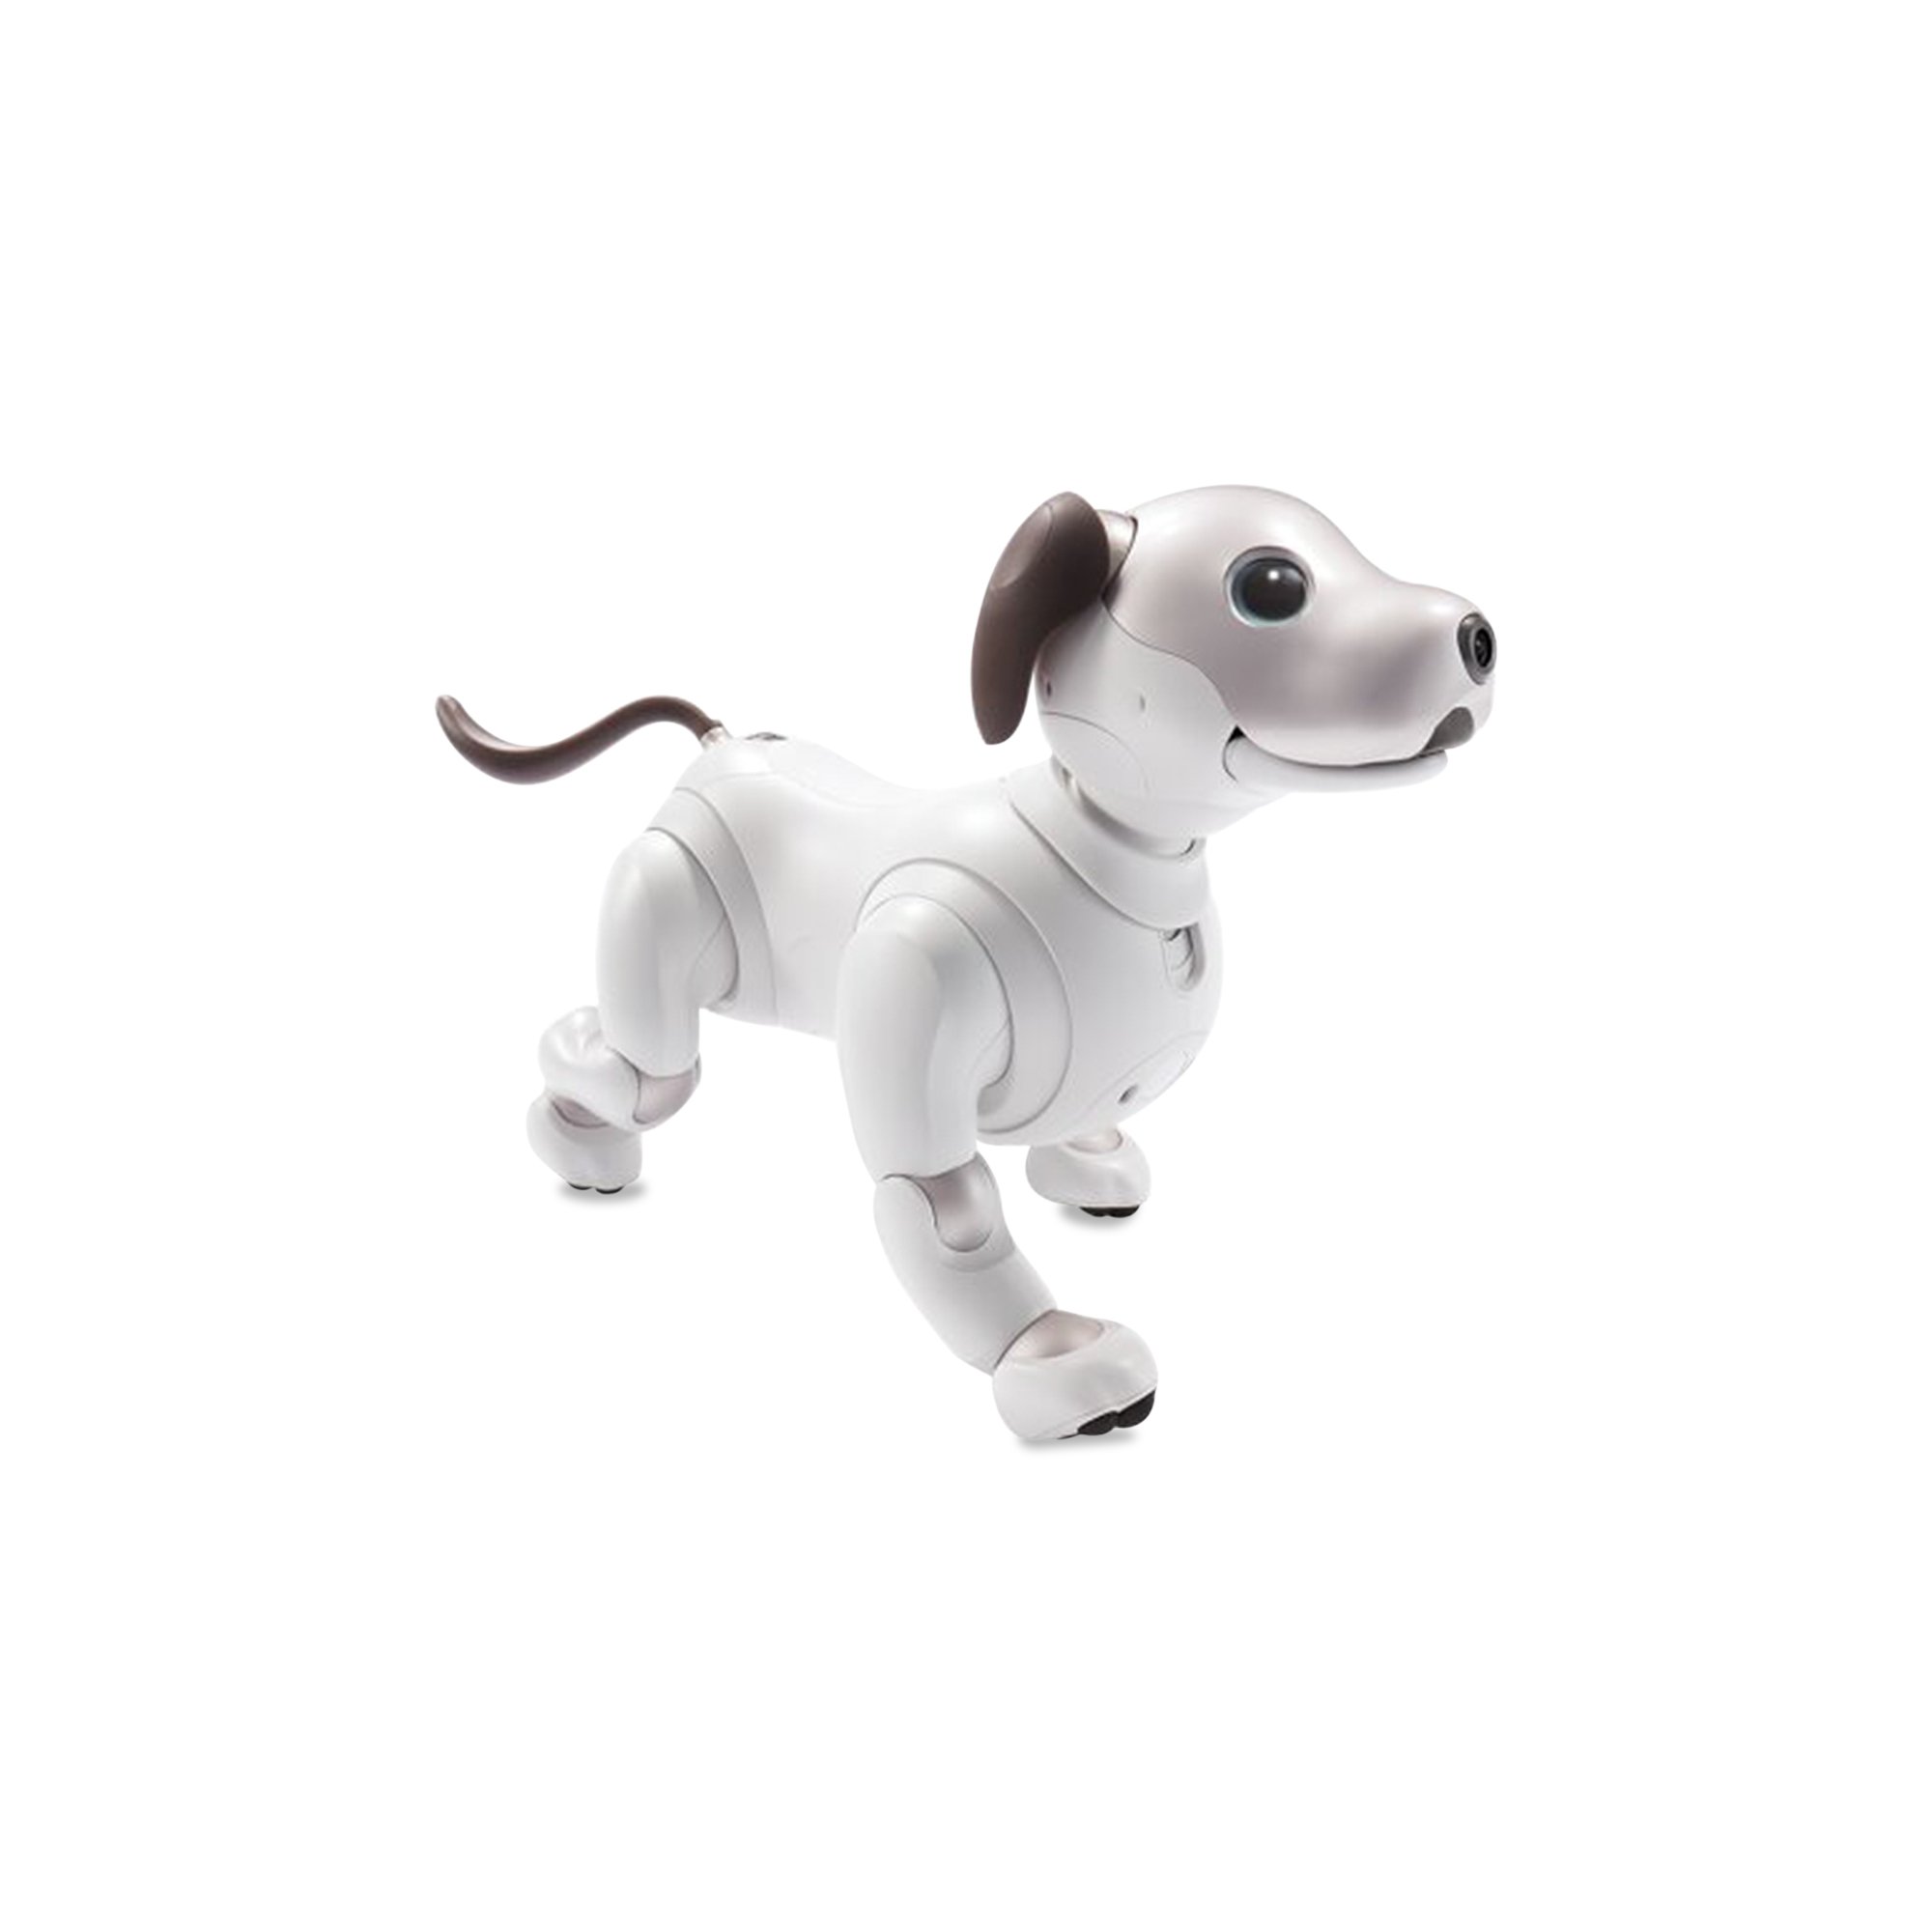 Buy Sony Aibo Companion Robot Dog In White - ERS 1000 | GOAT